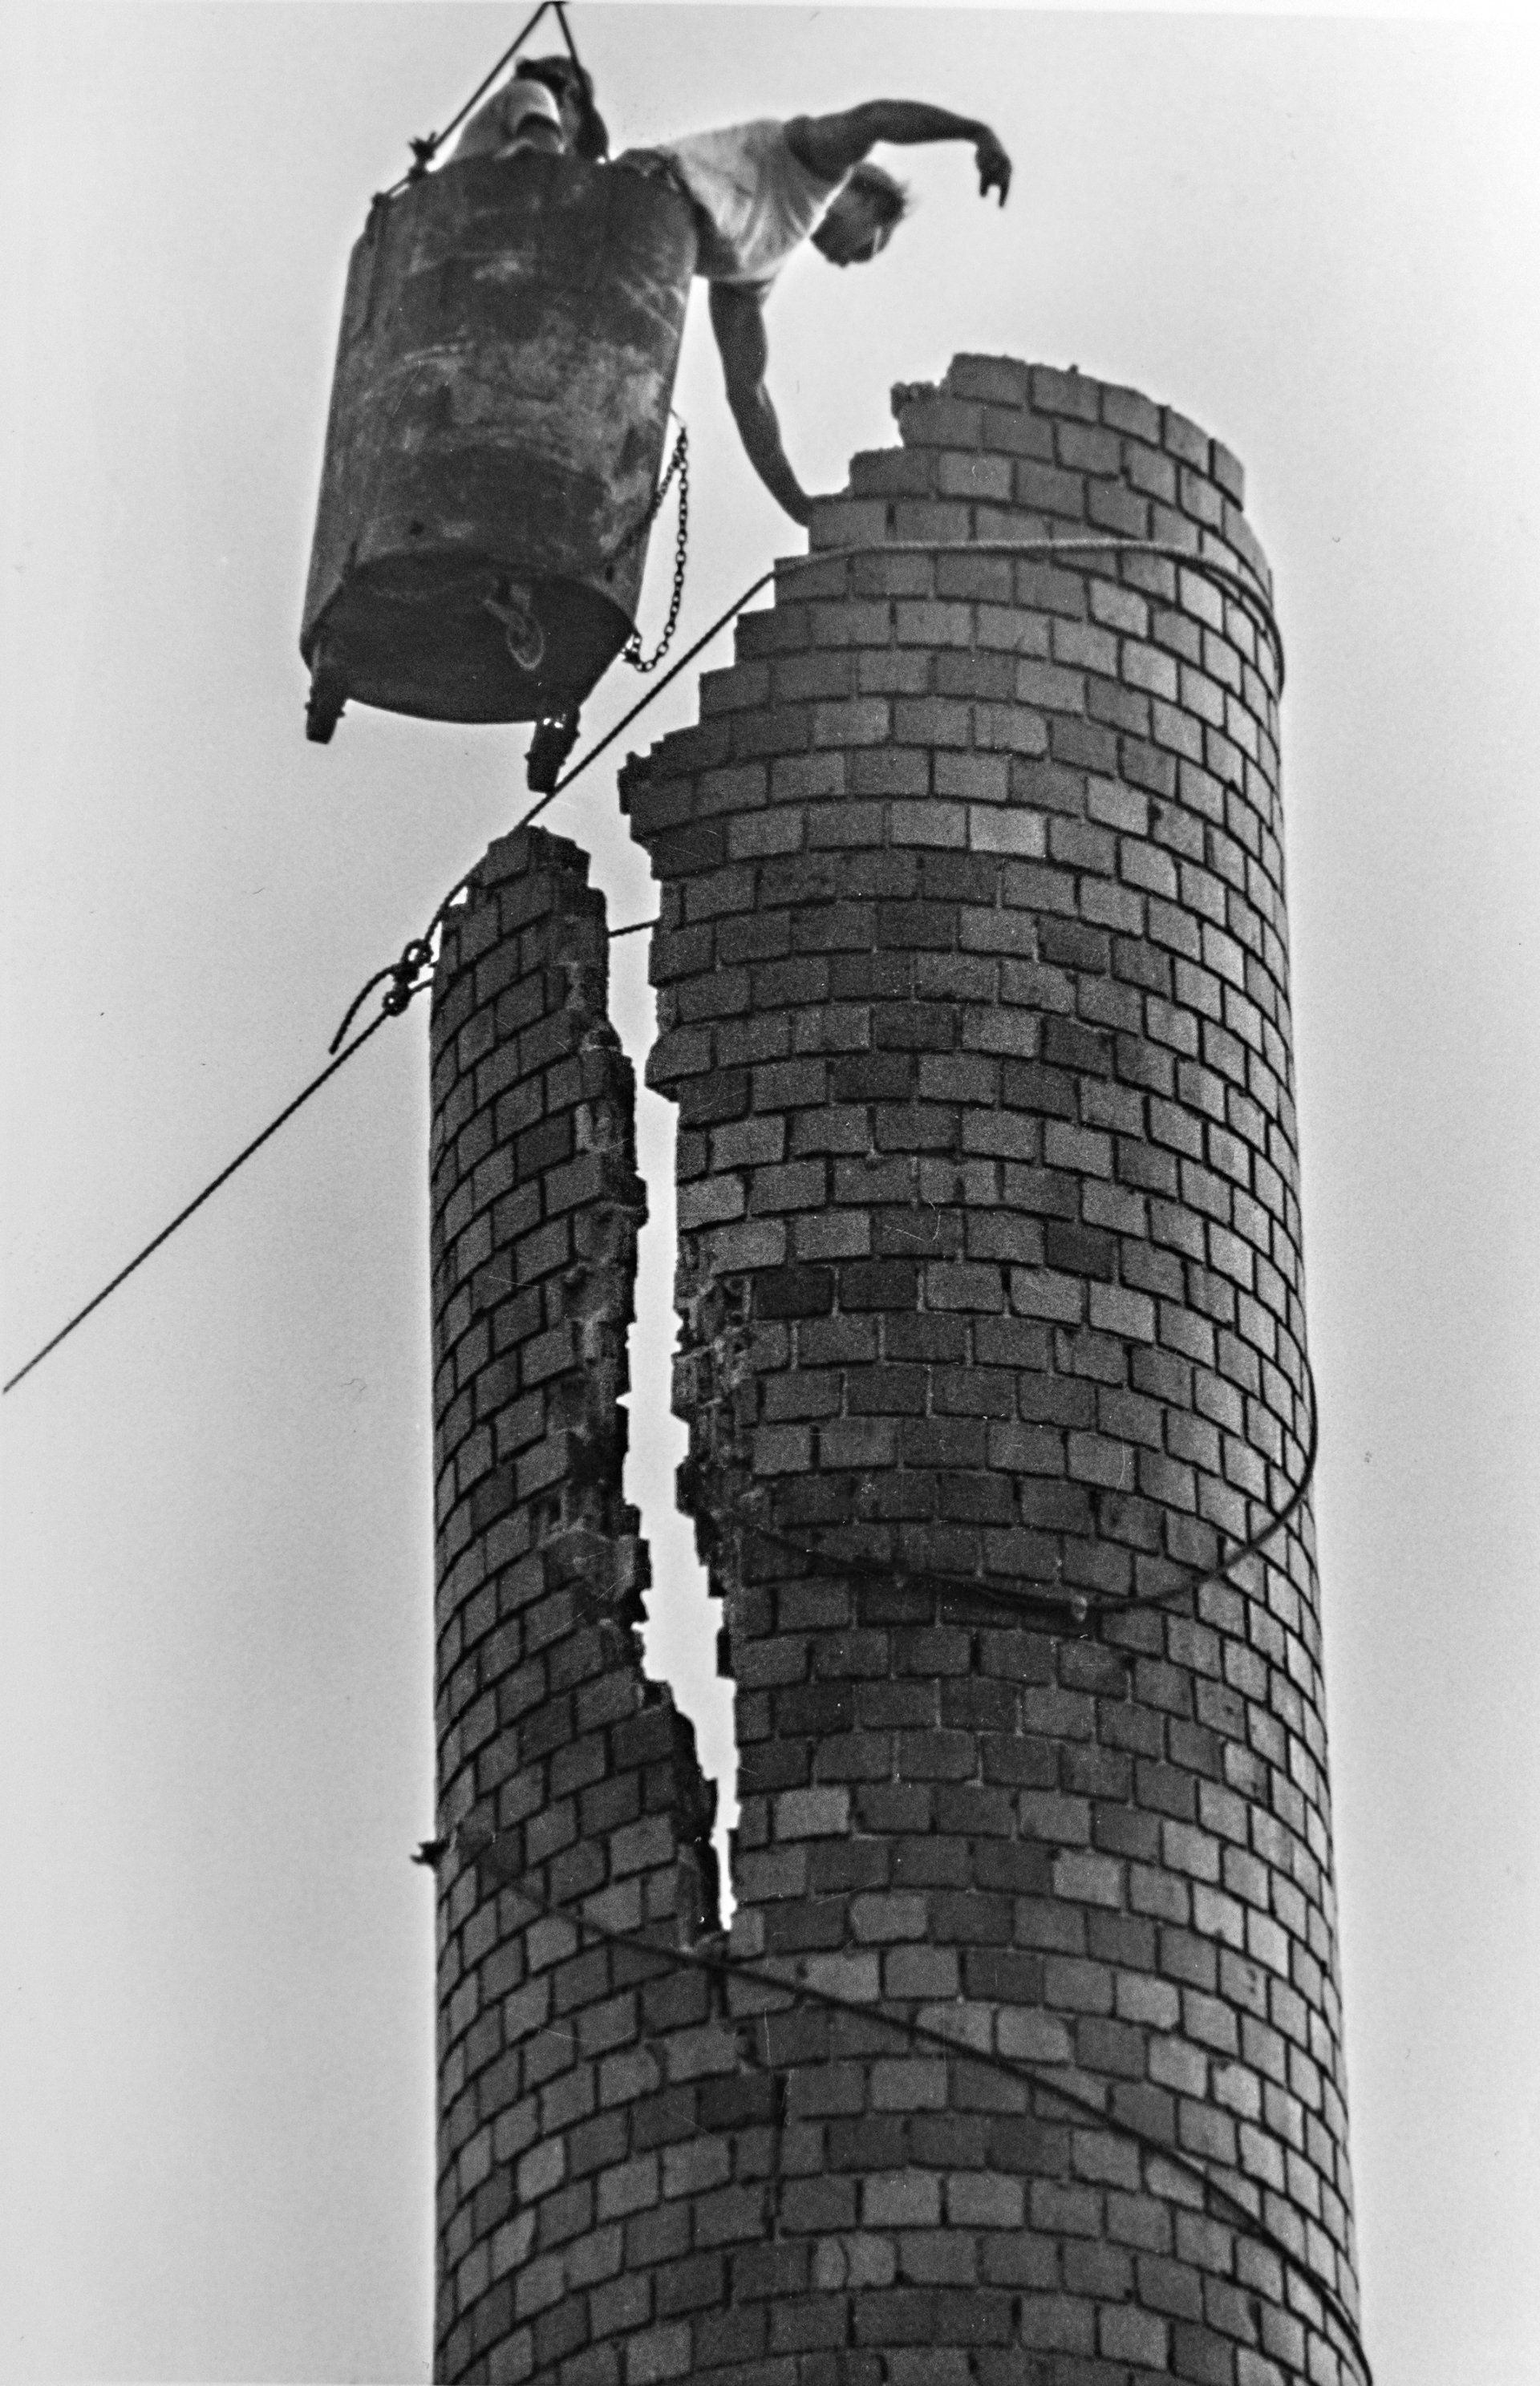 A black and white photo of a man standing on top of a brick chimney.